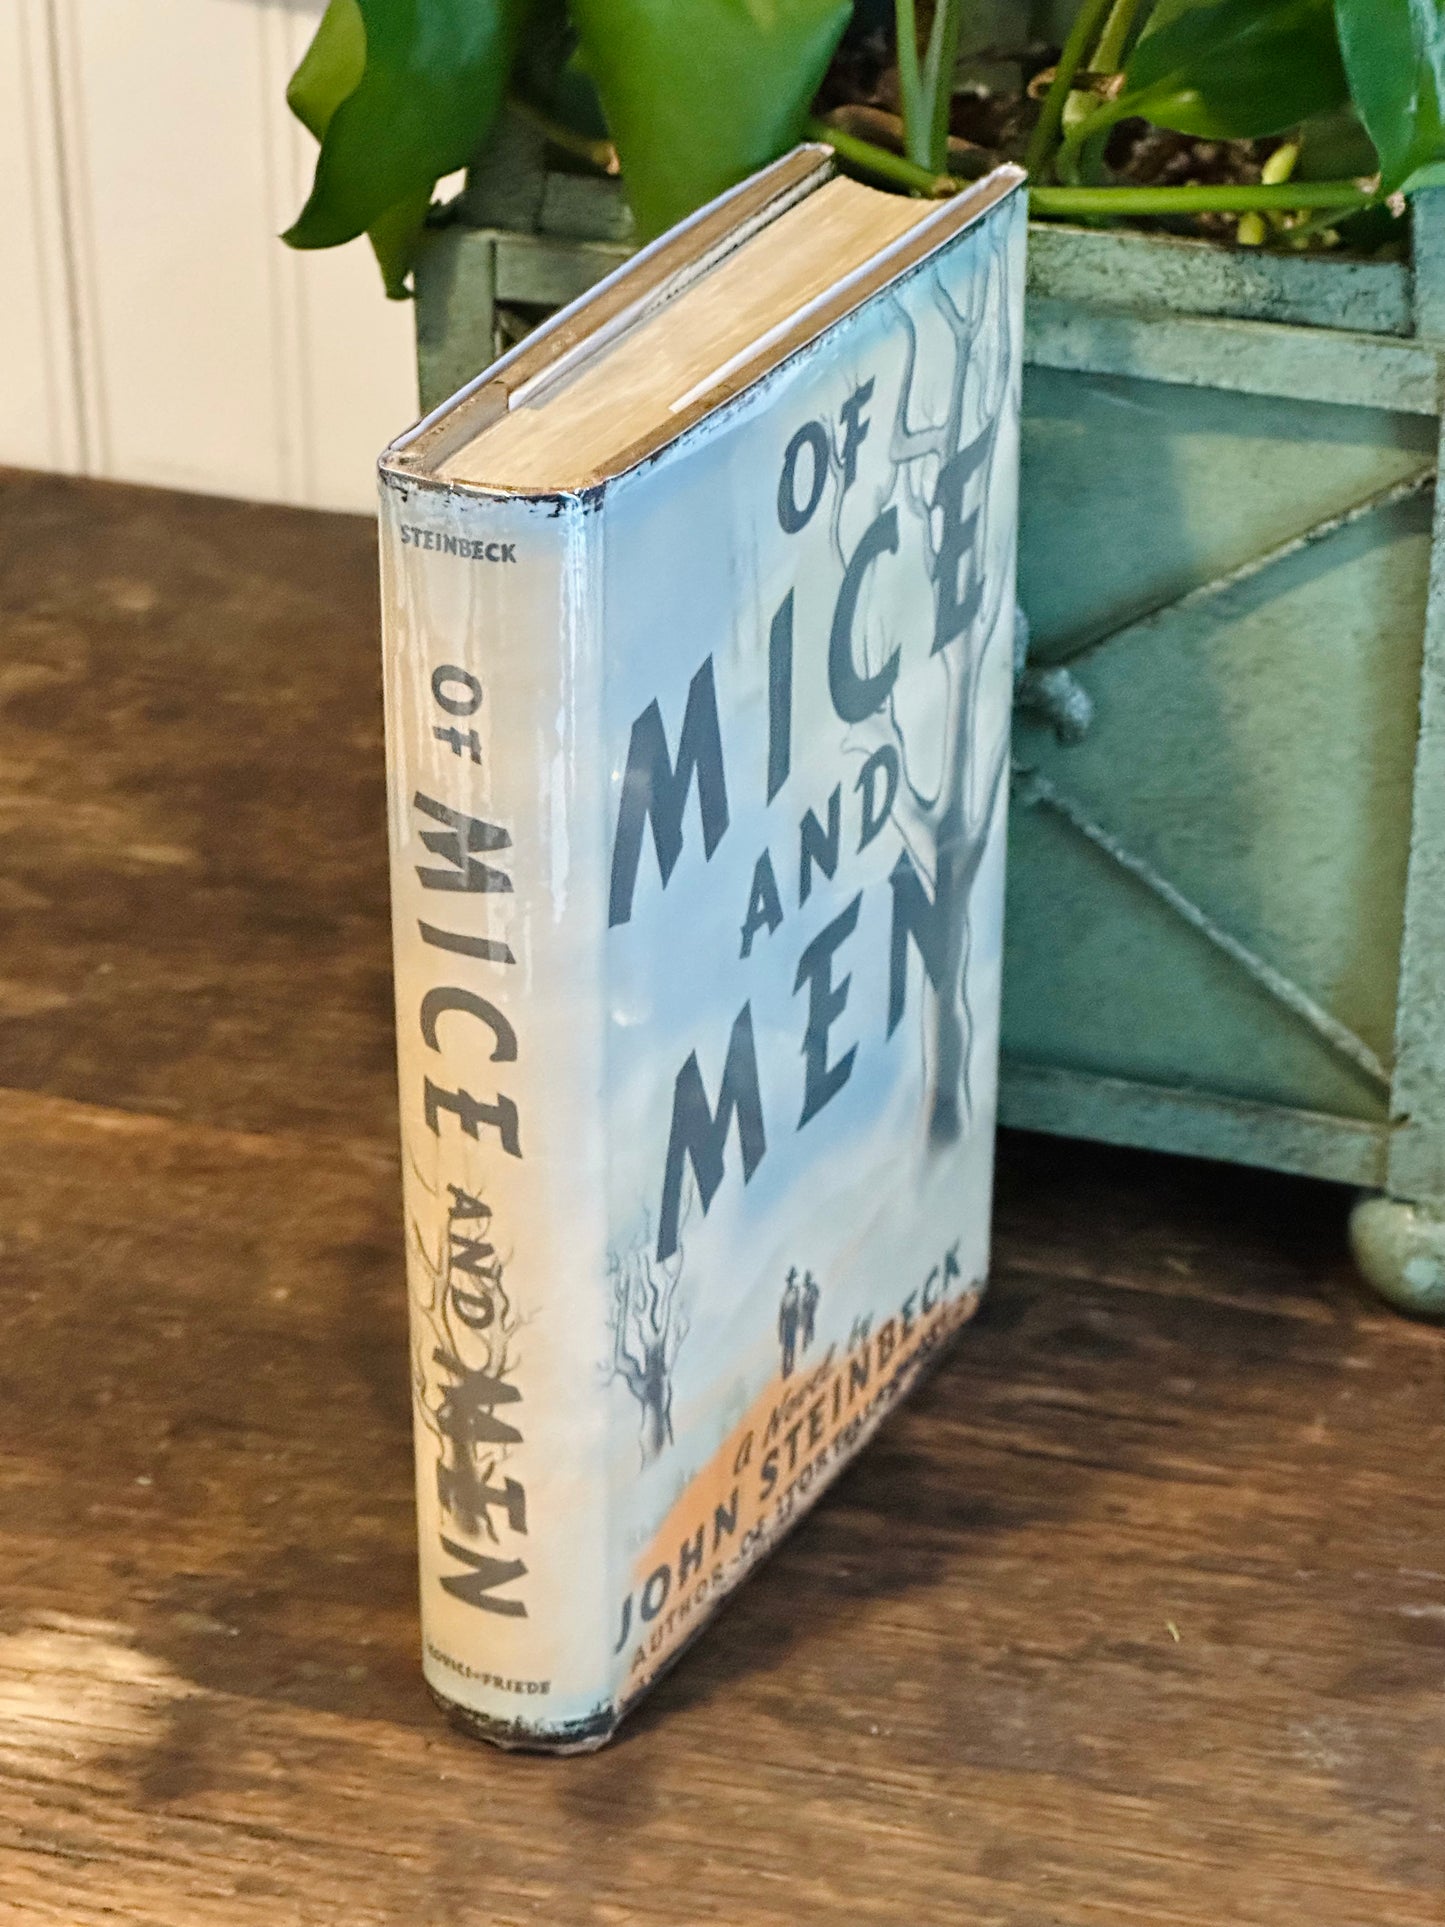 Of Mice and Men by John Steinbeck (First Edition)